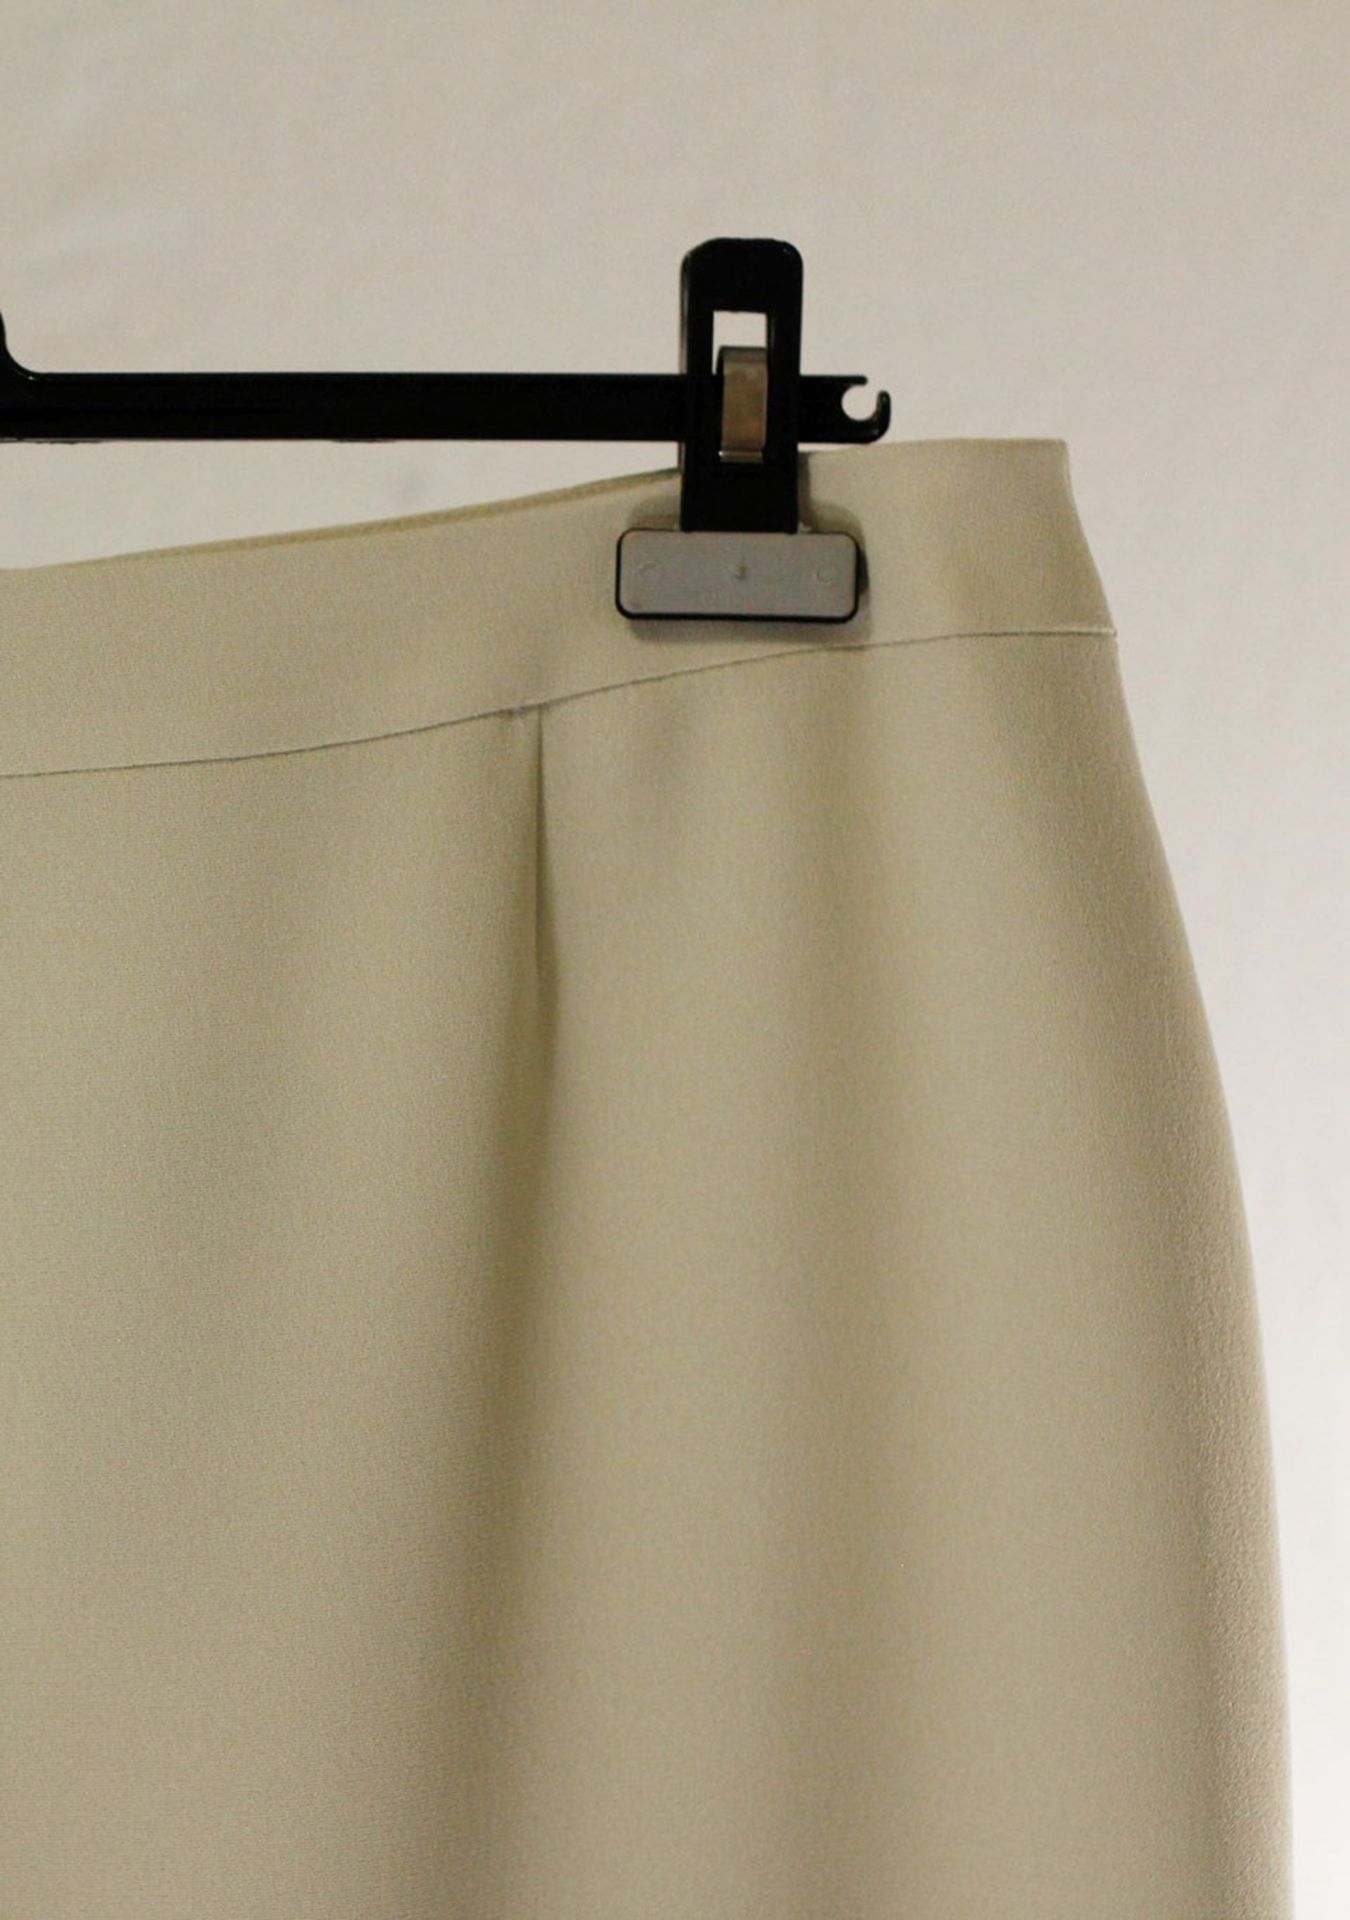 1 x Anne Belin Pistachio Skirt - Size: 16 - Material: 100% Polyester - From a High End Clothing - Image 8 of 11